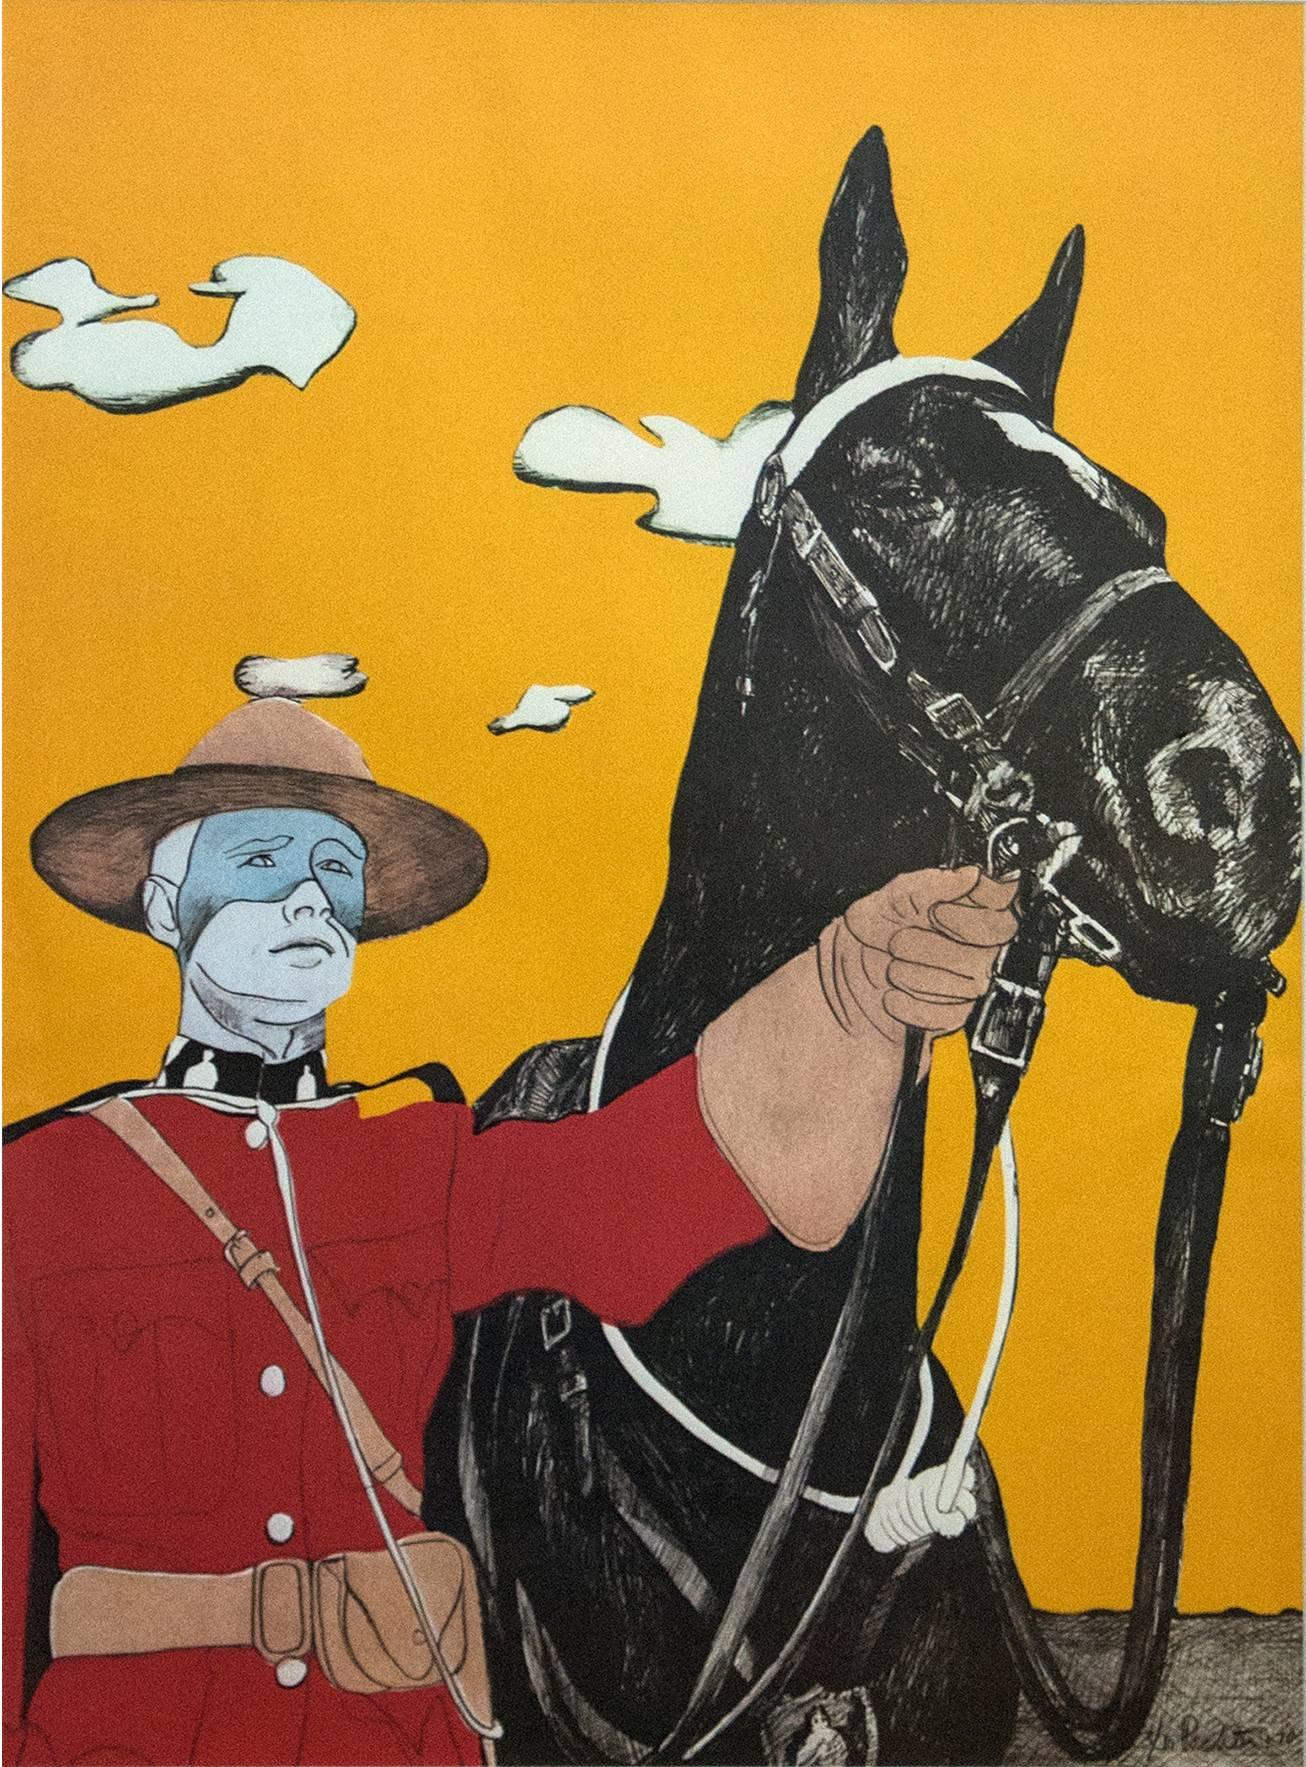 Nobility Obliges 3/10 - pop-art, Canadiana, iconic, contemporary, giclee print - Print by Charles Pachter